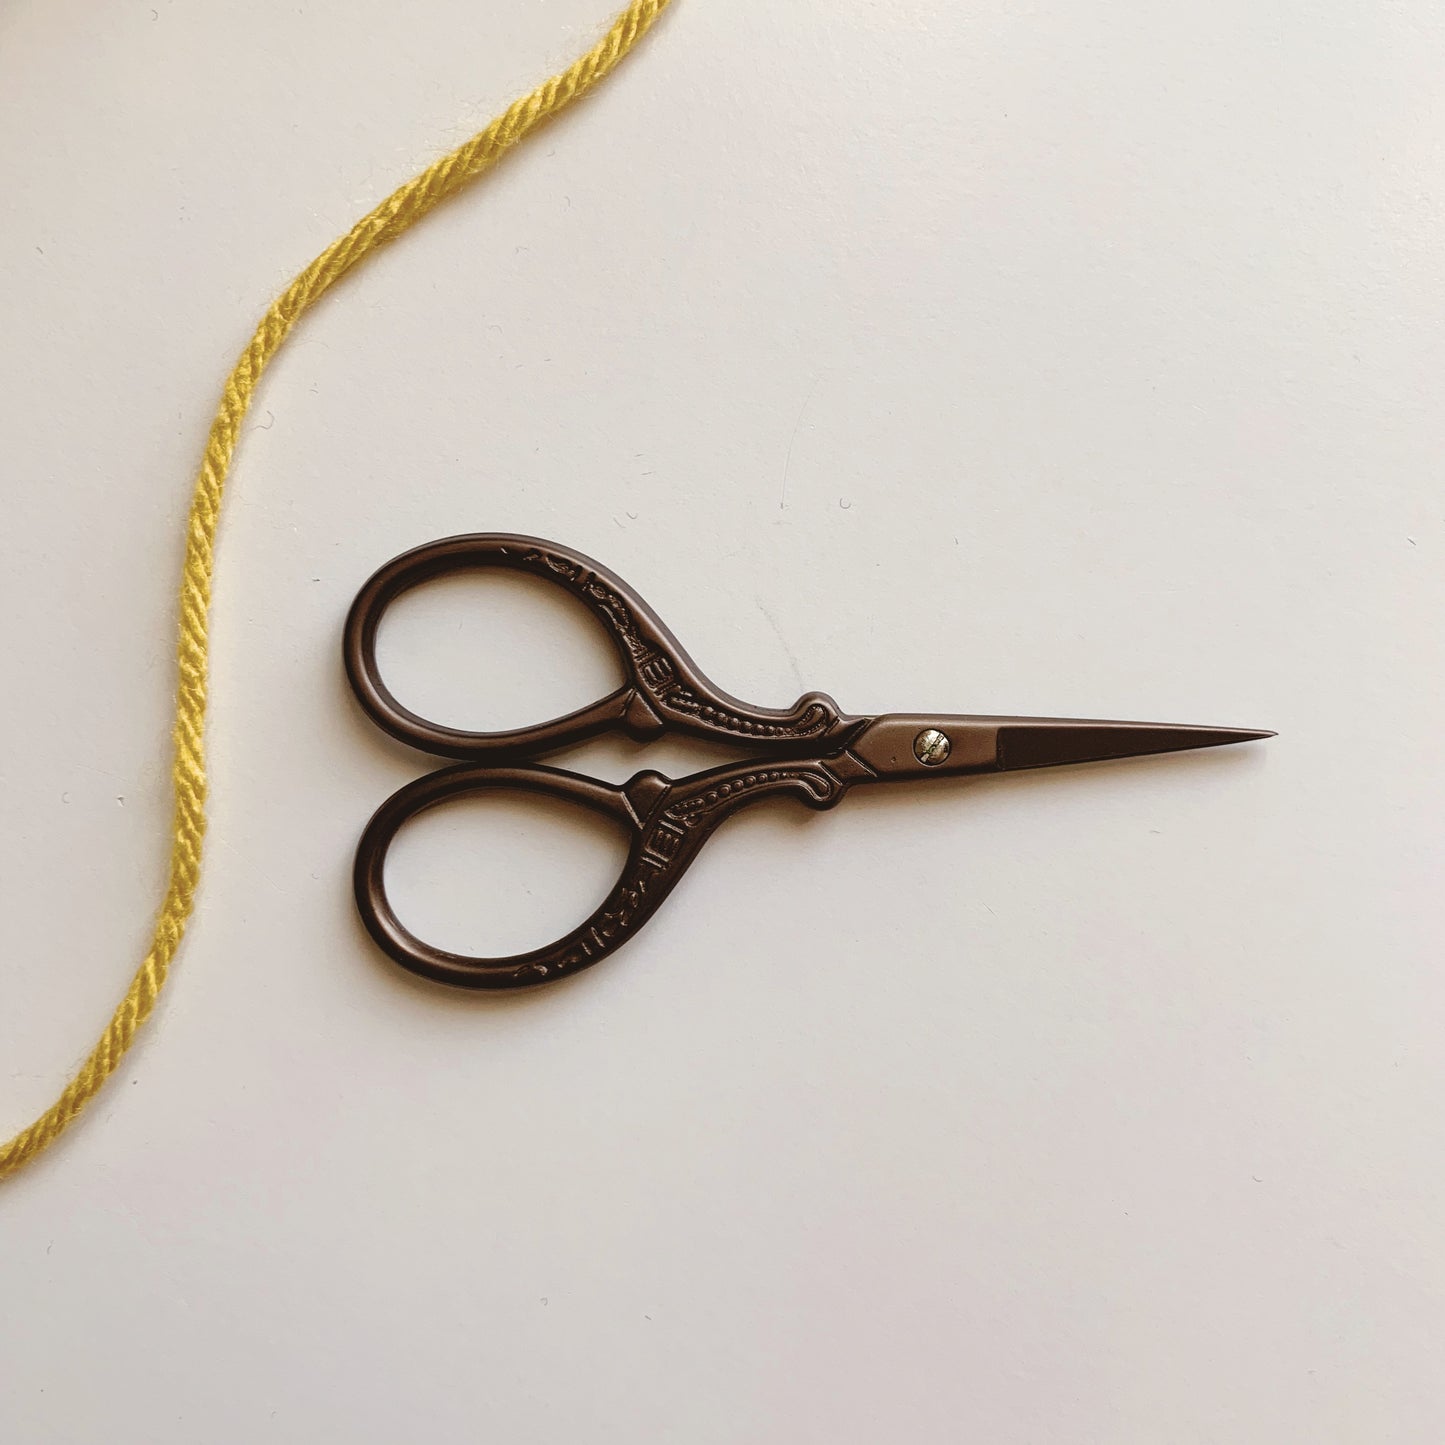 Leyah Antique Style Chocolate Brown Stainless Steel Embroidery Scissors